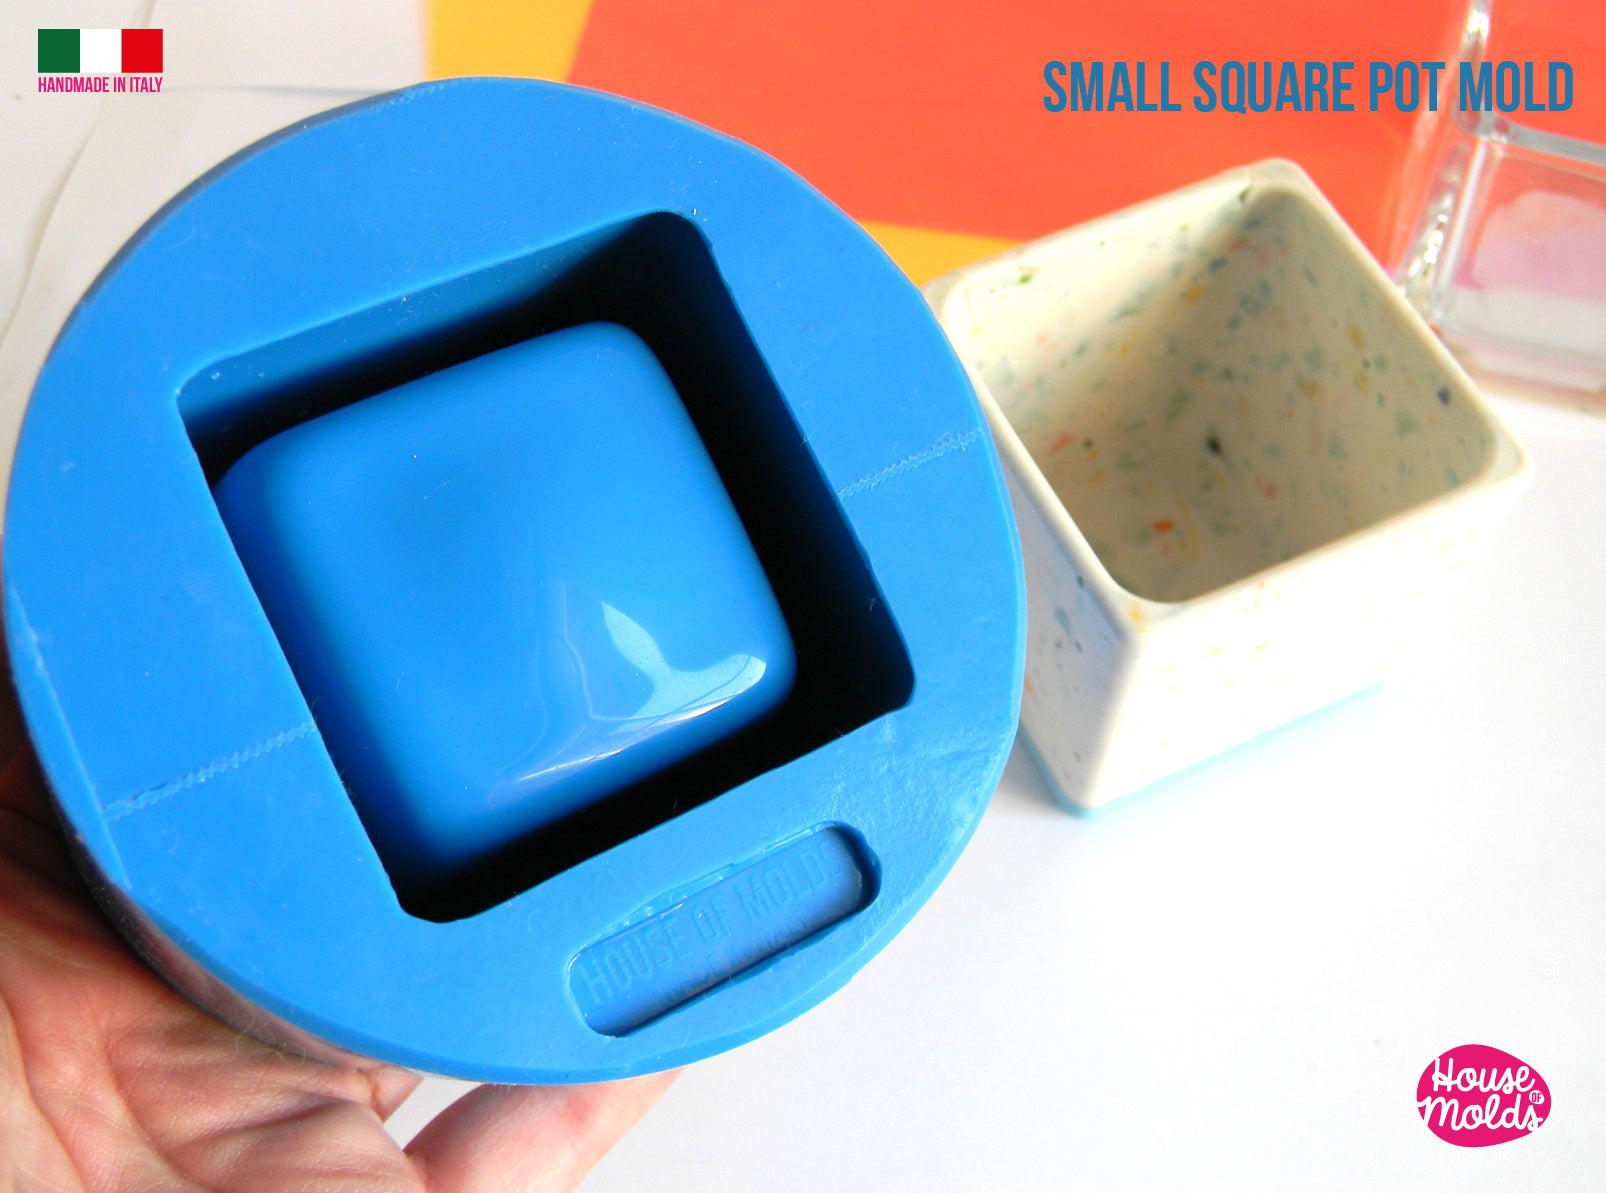 SQUARED LITTLE POT SILICONE MOLD 5,6 cm x 5,6 cm - super glossy - idea –  House Of Molds